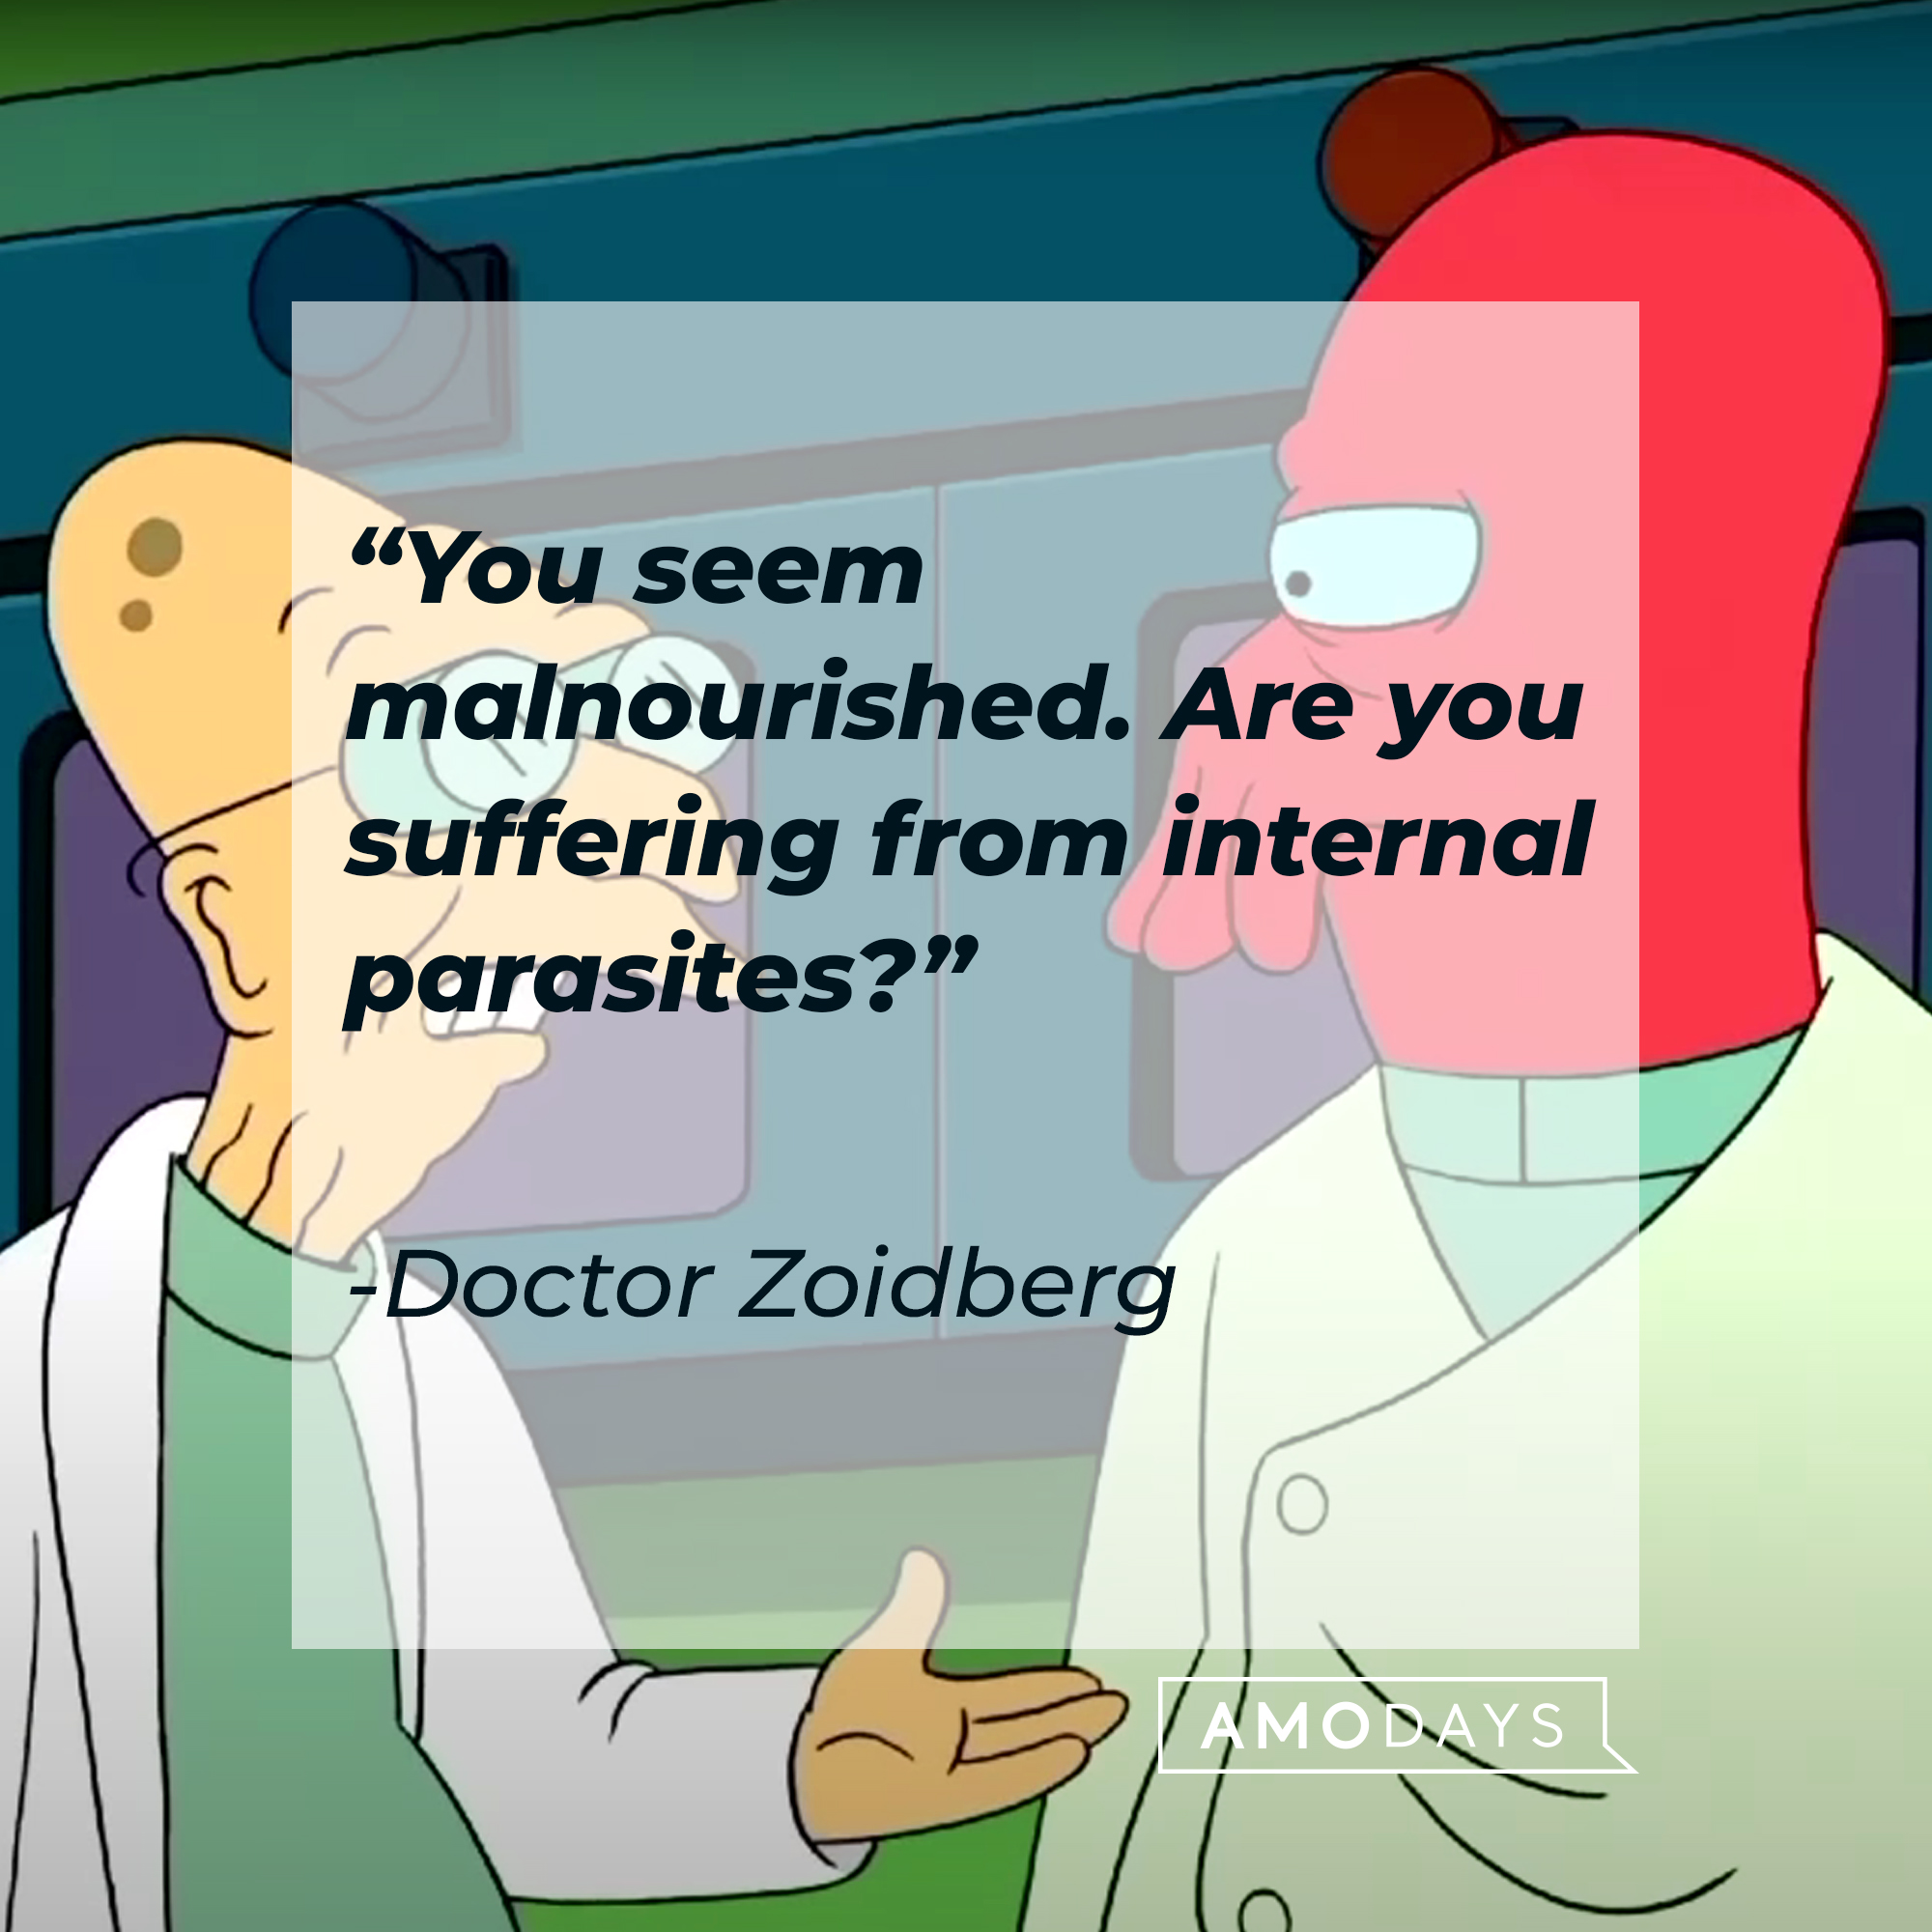 Doctor Zoidberg, with one other character and his quote: “You seem malnourished. Are you suffering from internal parasites?” | Source: facebook.com/Futurama